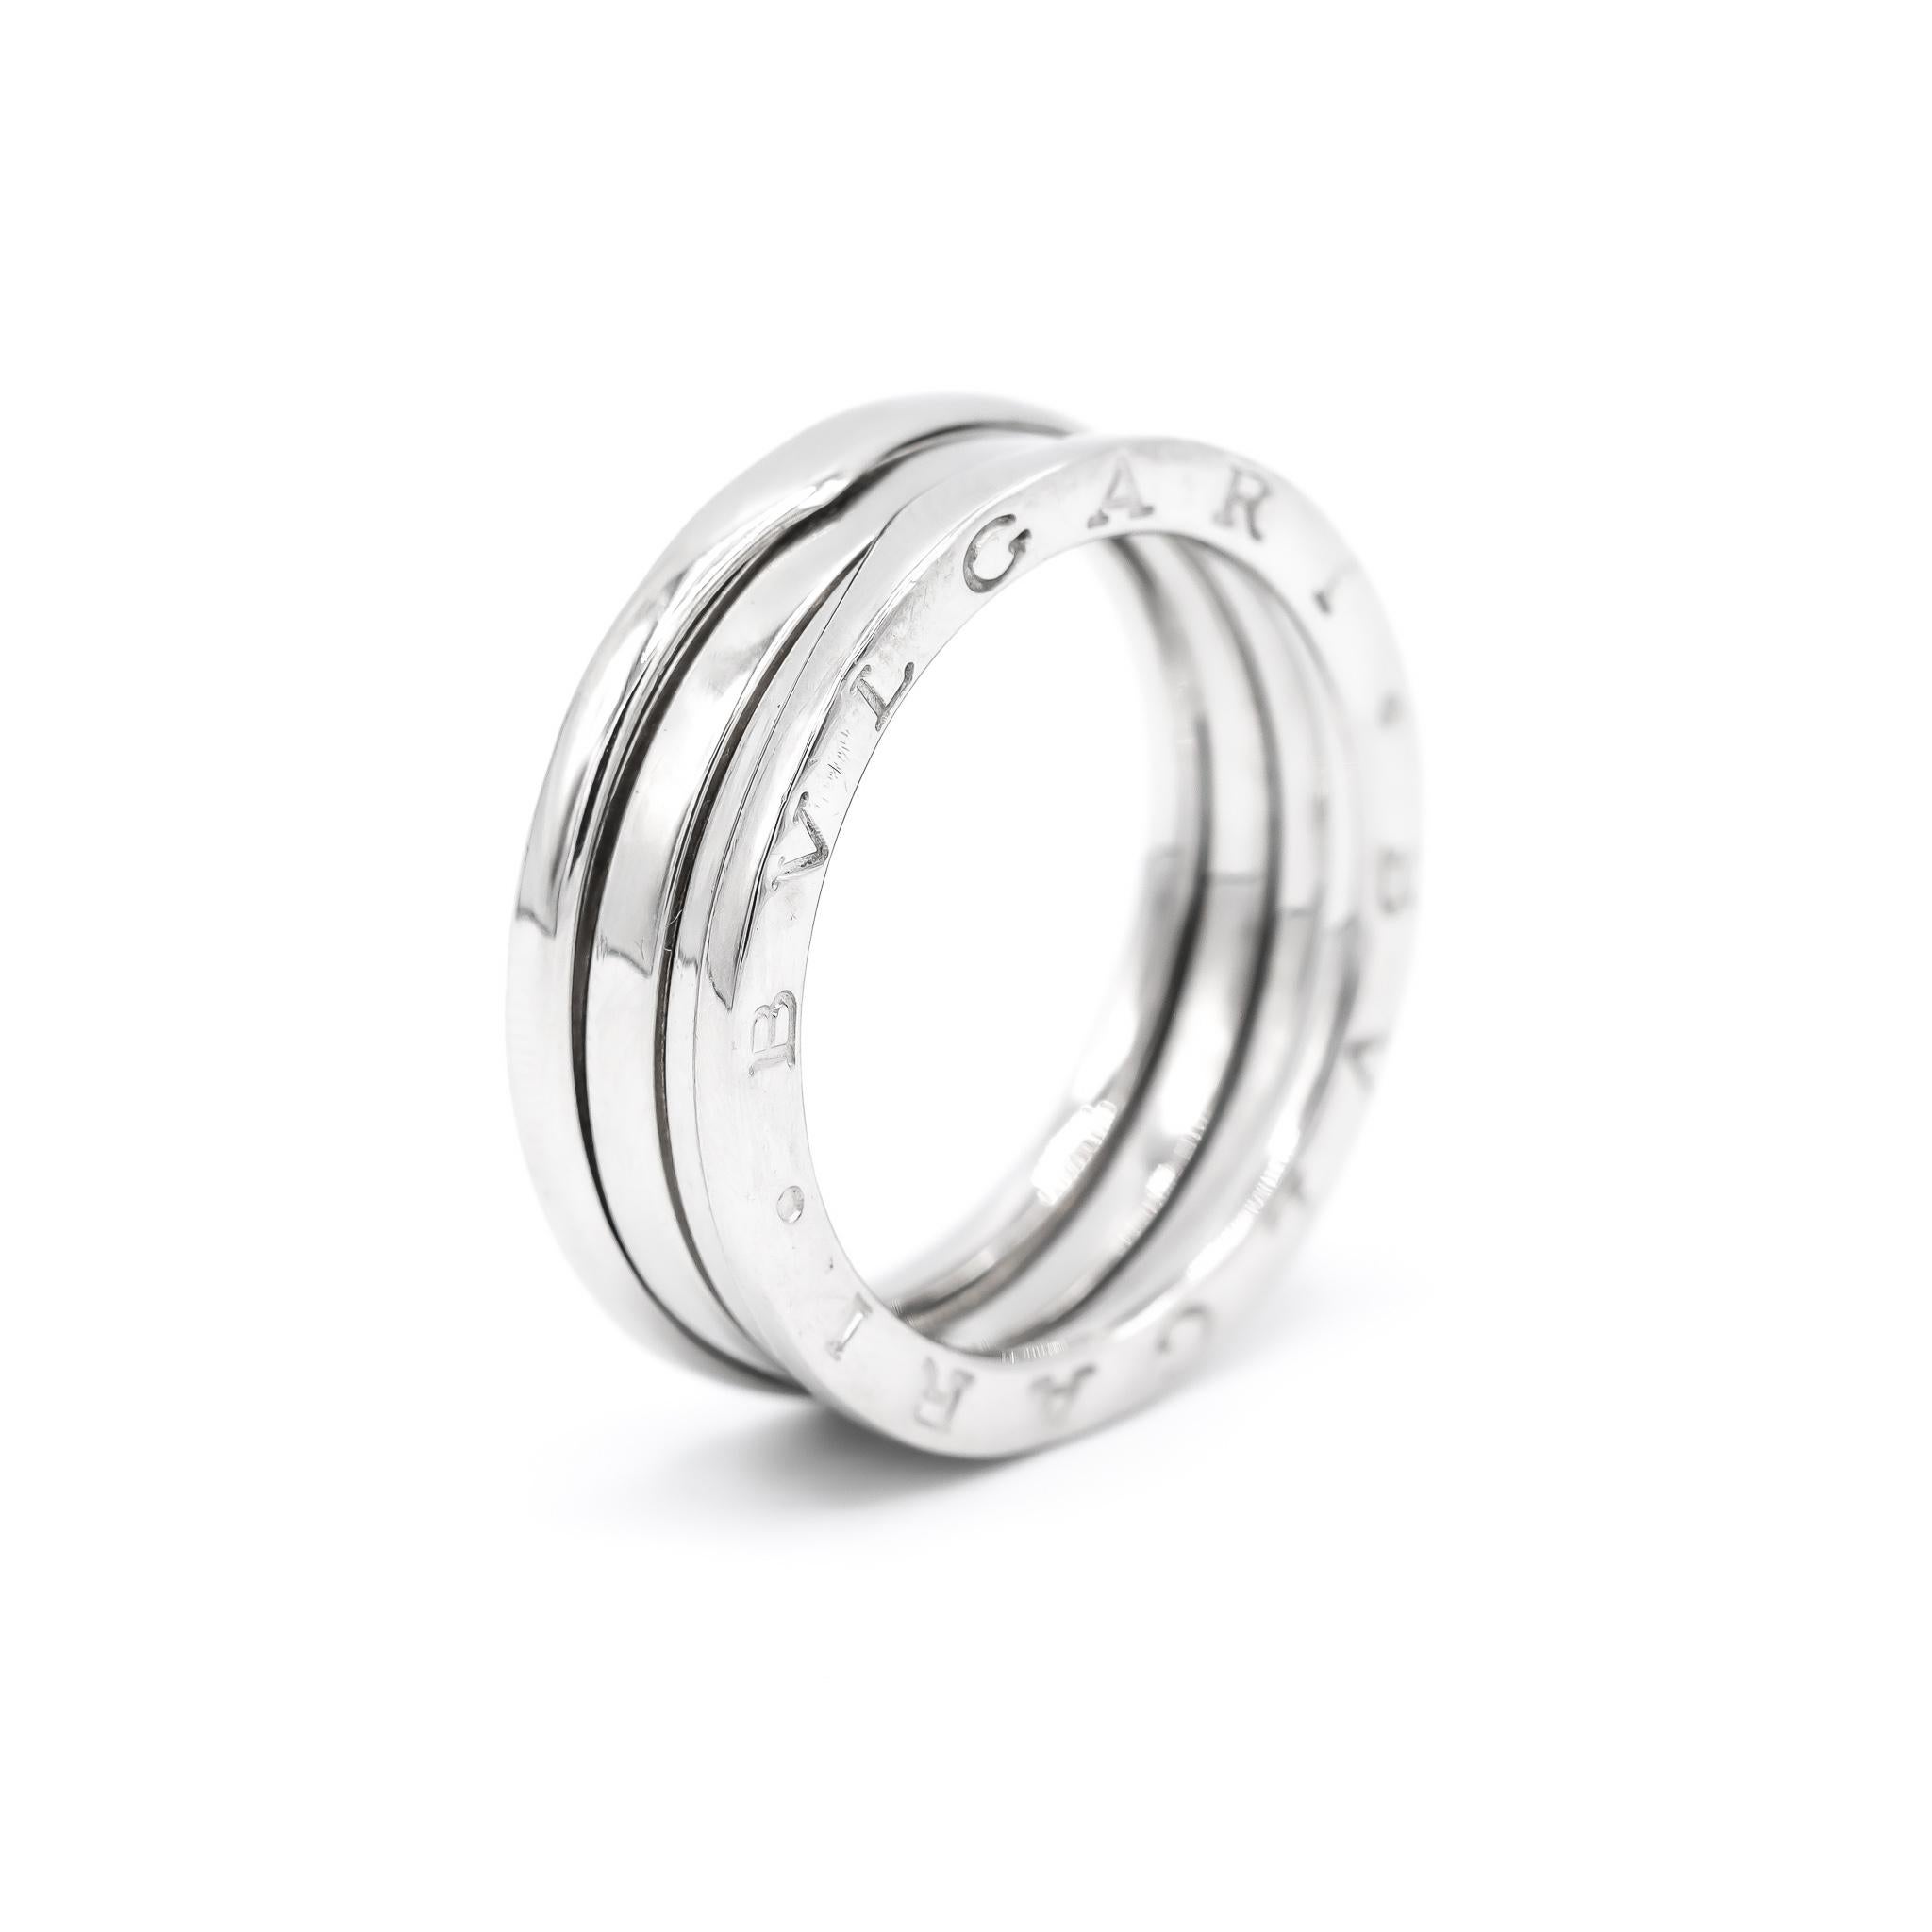 One designer made textured & polished, machine engraved 18K white gold, wedding ring with a comfort-fit shank. The ring is a size 10, is 2.53mm thick and measures approximately 7.53mm in width and weighs a total of 9.80 grams. Engraved with